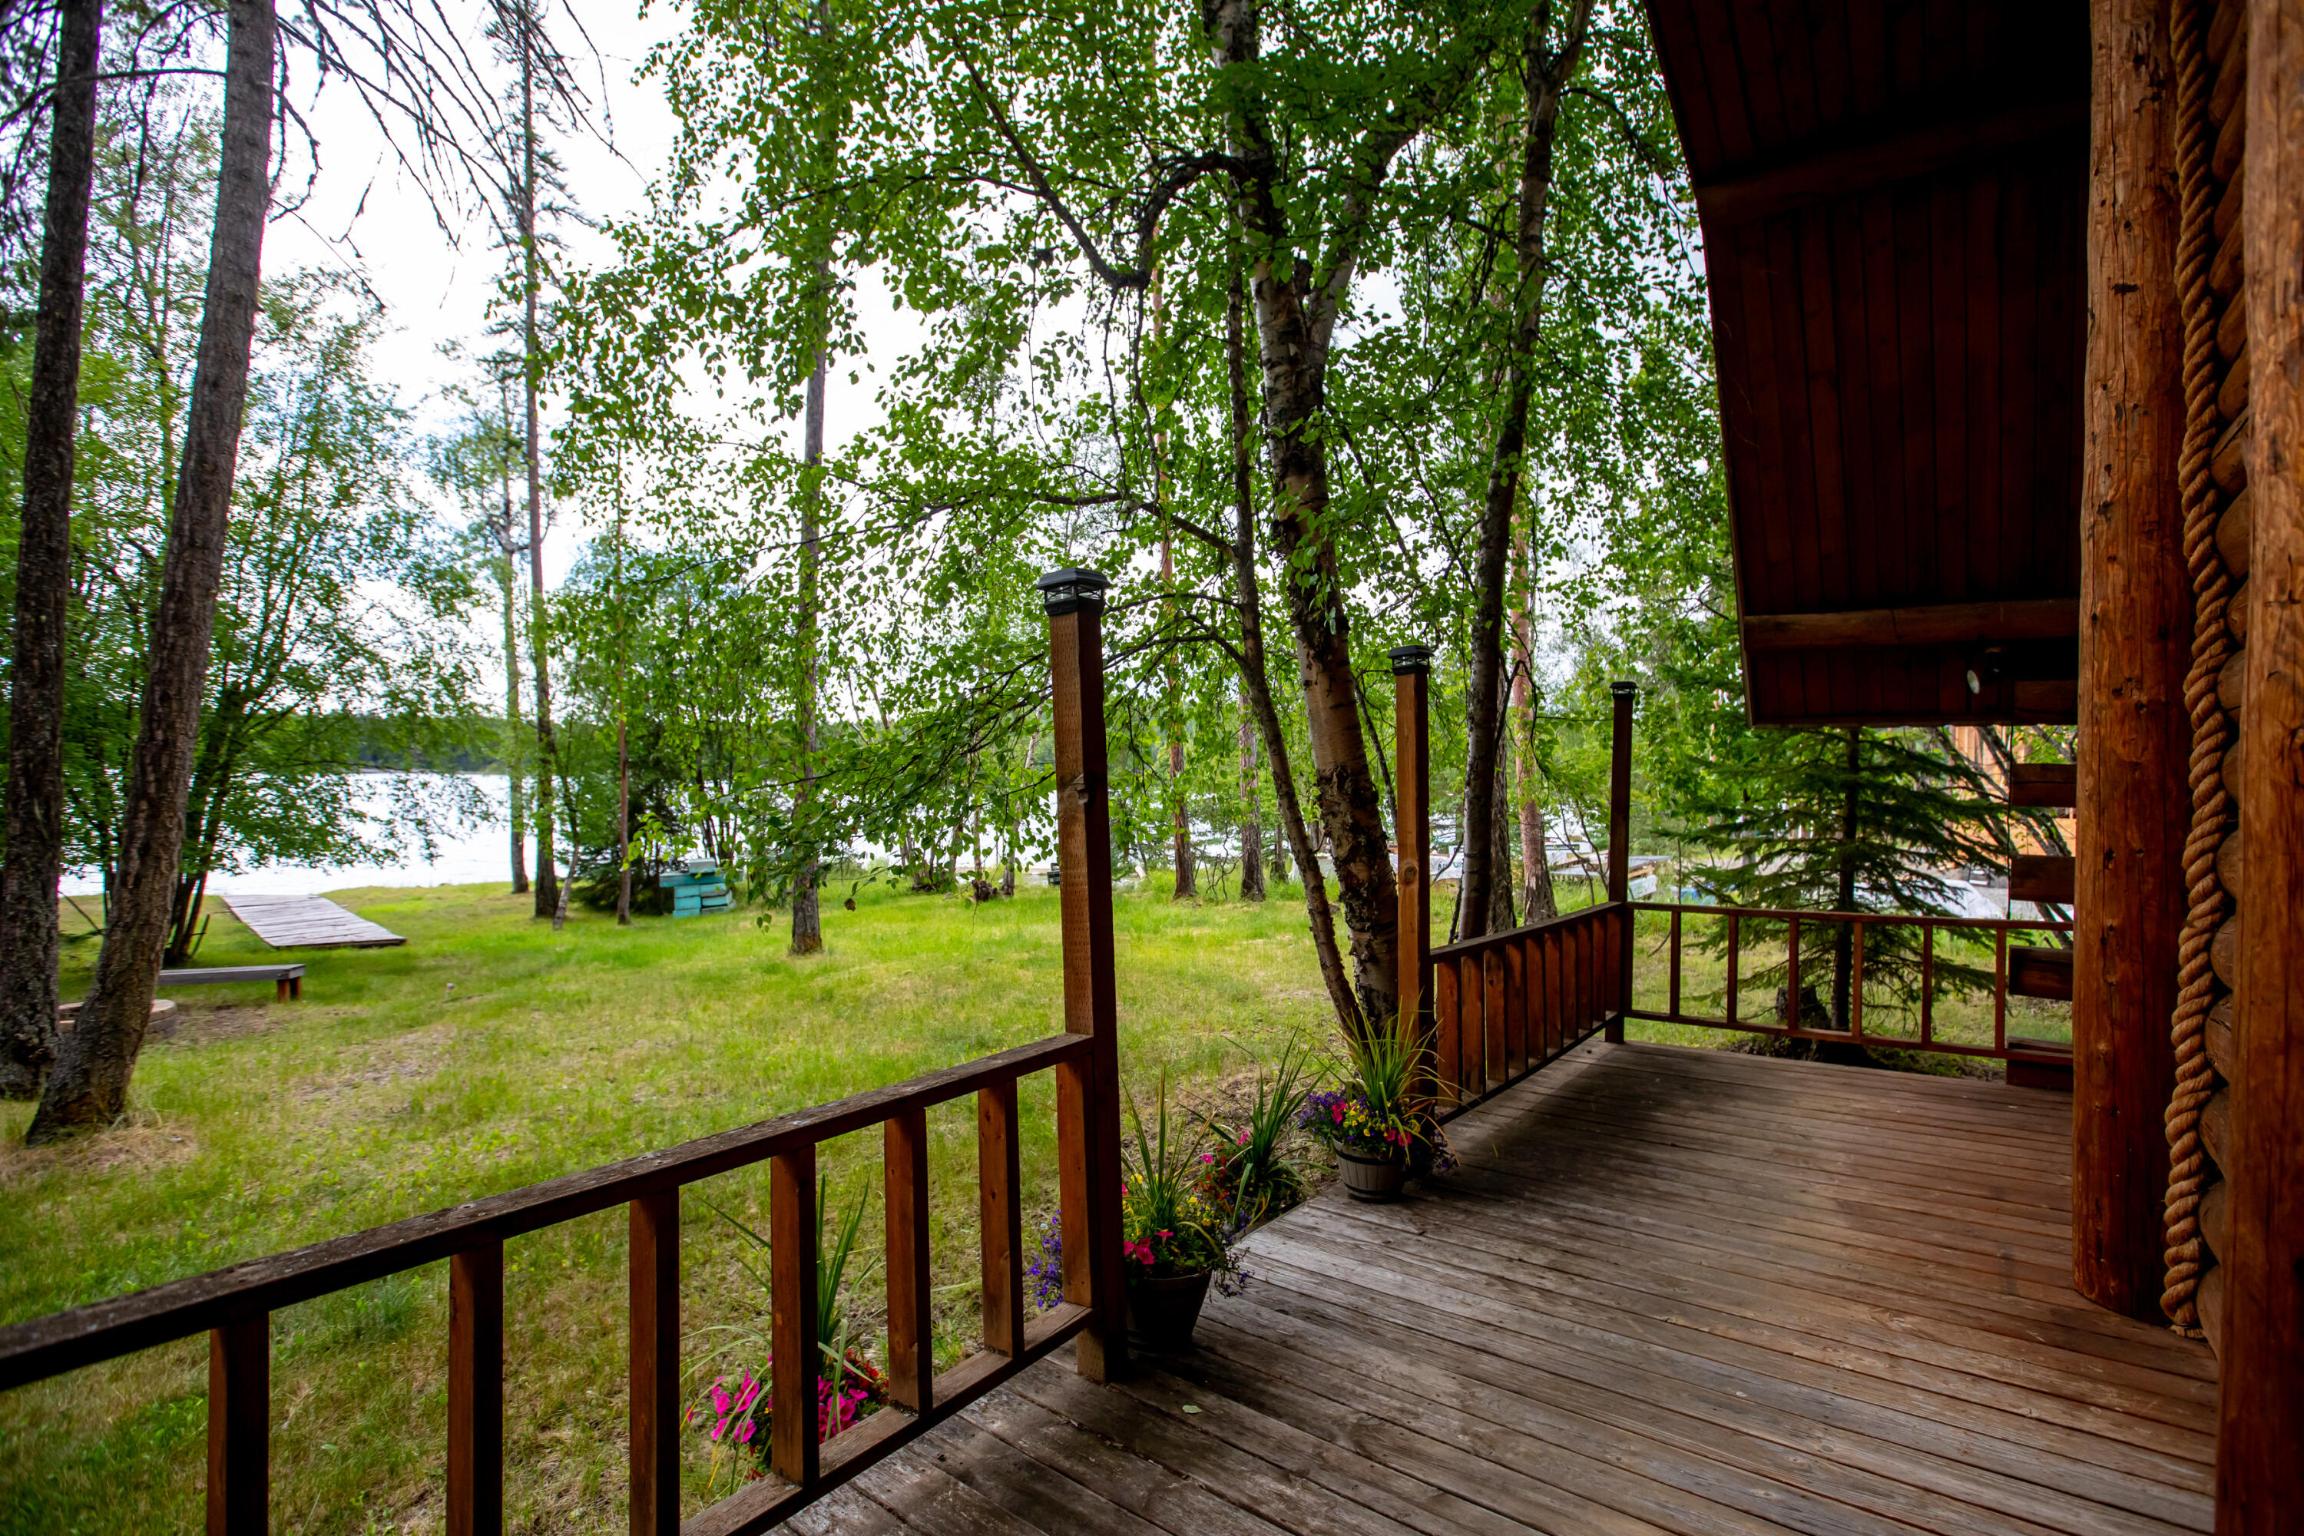 The ultimate ''Montana Cabin in the Woods'' features 100 ft of water front on the pristine mountain lake, Glen Lake, just 45 miles north of Whitefish. Enjoy the Amish built log cabin, which was expanded to provide 3 bd/1ba plus oversized garage for storage of toys. Current layout sleeps 12. The .82ac level lot hosts mature pine trees, providing privacy while protecting the home from view from lake or road. The public boat launch is approximately 200 yds north, making this site extremely attractive to the water enthusiast, whether for sport or quiet fishing. Add'l features include large front porch for evening sunsets, a fire pit with benches and dock/walkway to beach. Property is being sold ''AS IS''. Easy to show! Call/text Barb Riley at 406-253-7729 or your real estate professional. Surface Water: Glen Lake